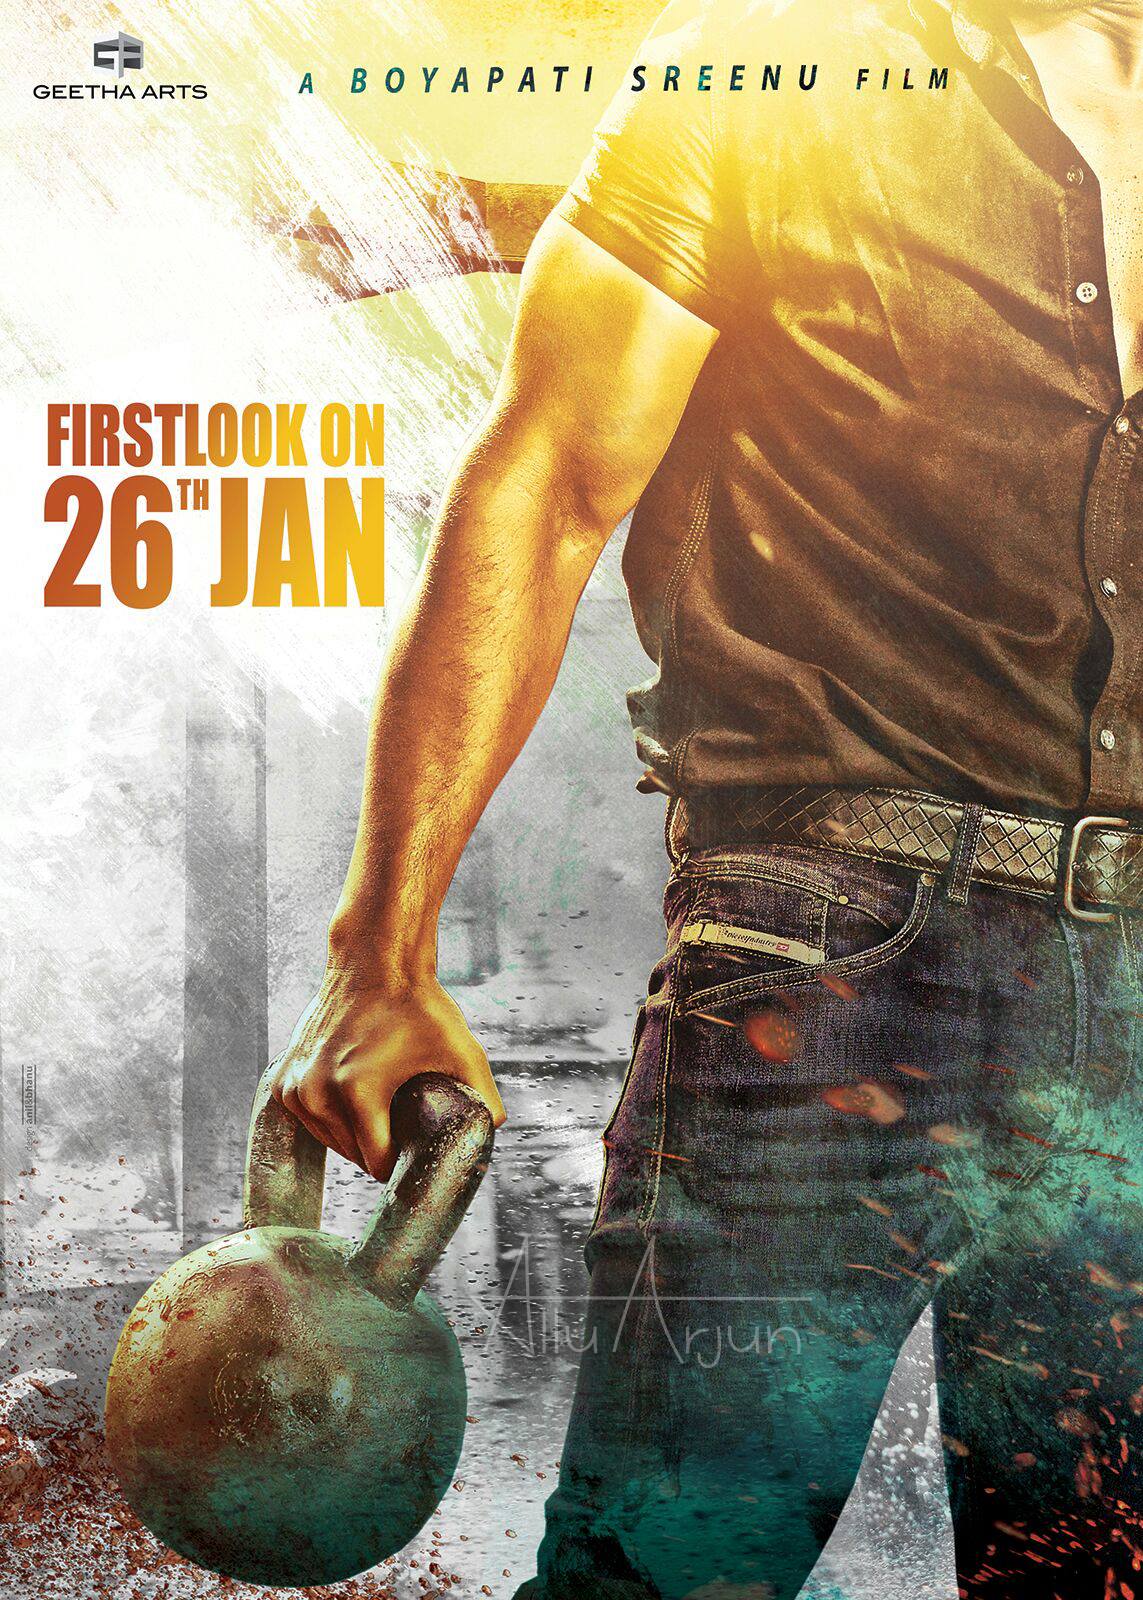 Sarainodu Pre-Poster Released Movie First Look Poster Teaser on January 26th